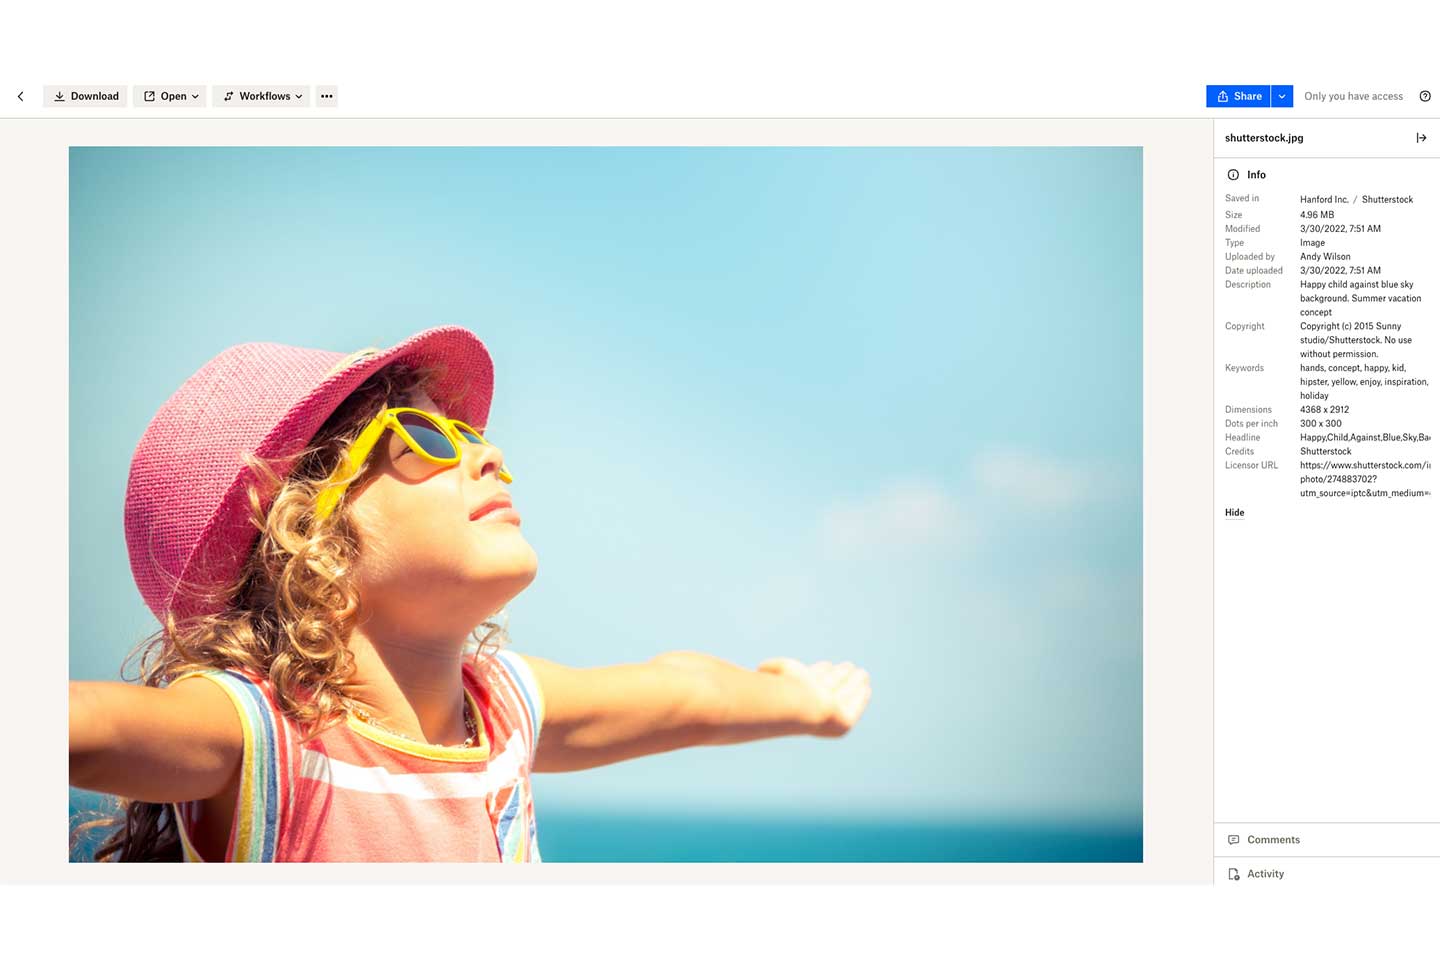 Photo of young girl at beach shown as Dropbox preview with image details in right sidebar